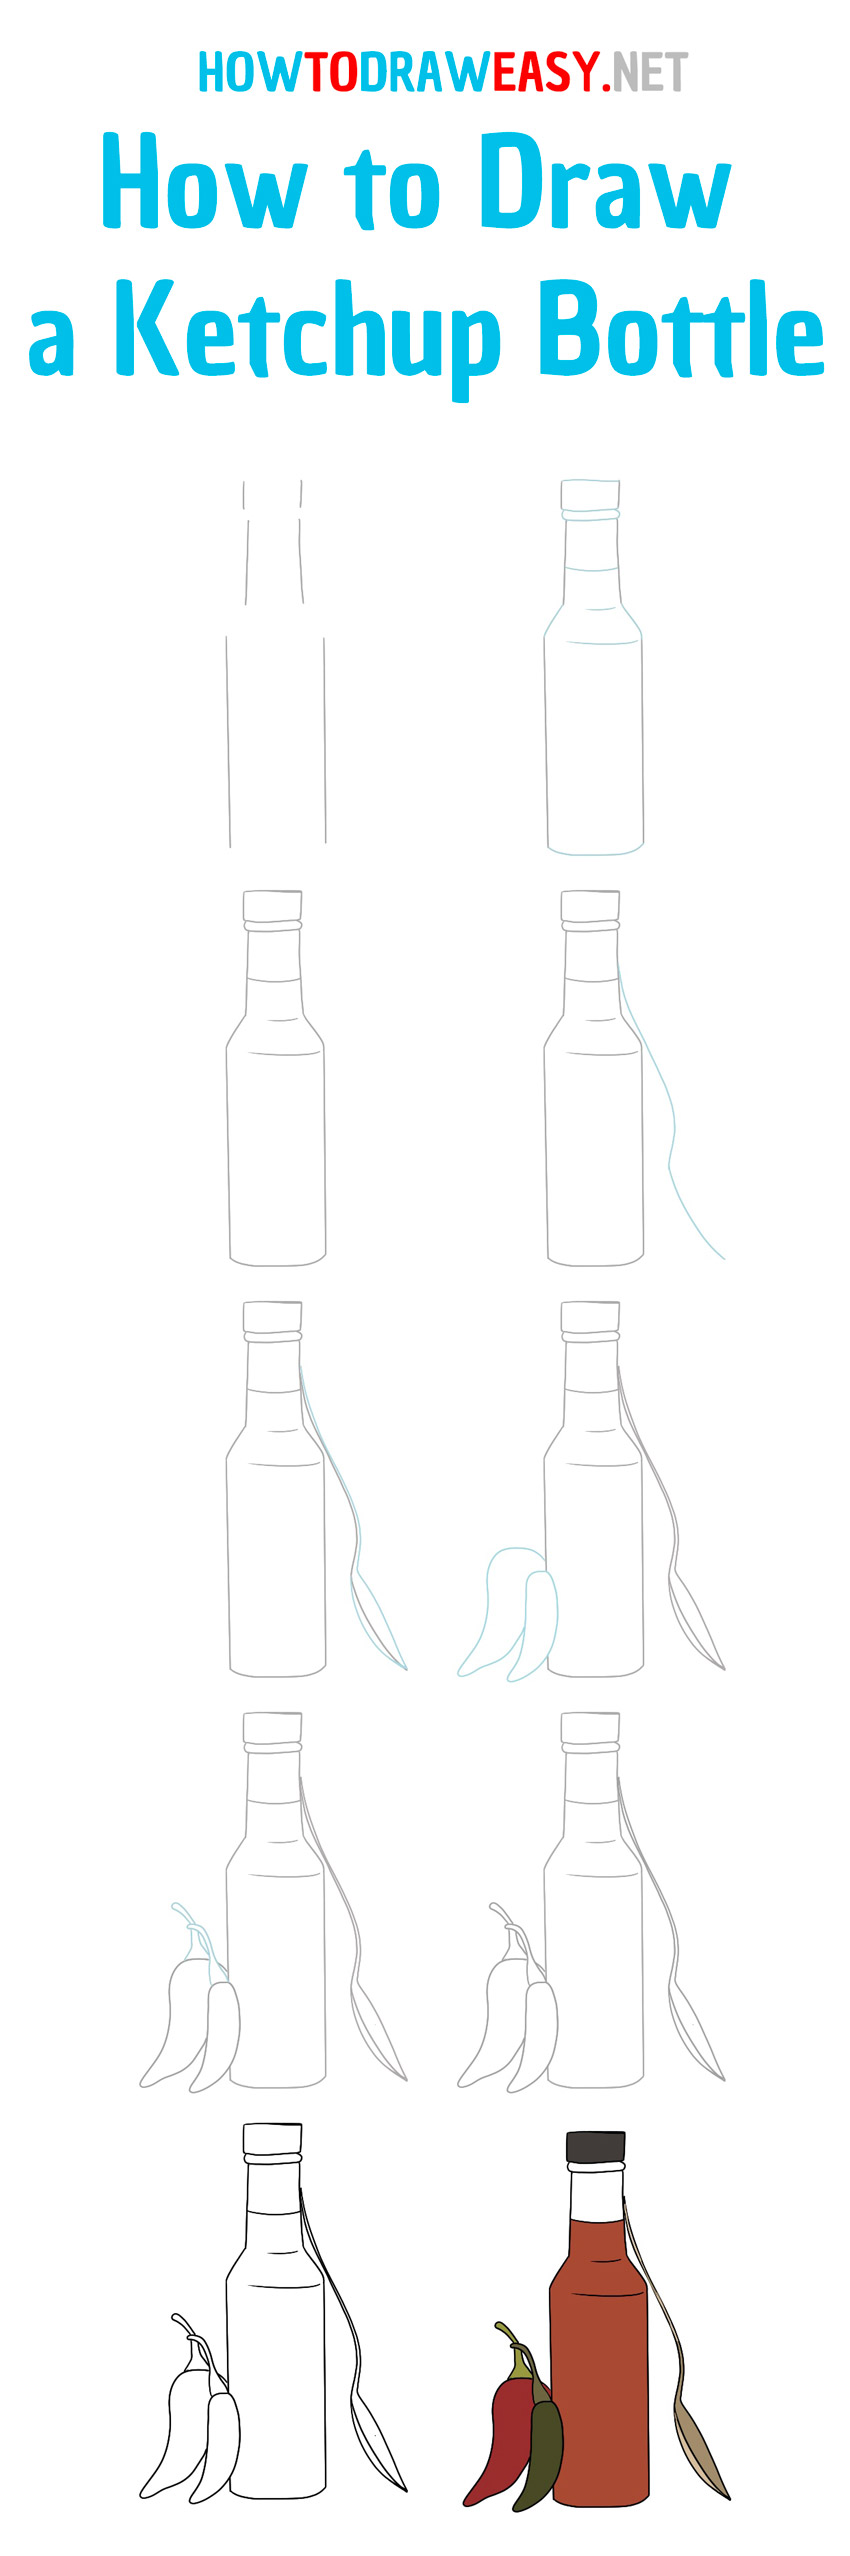 how to draw a ketchup bottle step by step